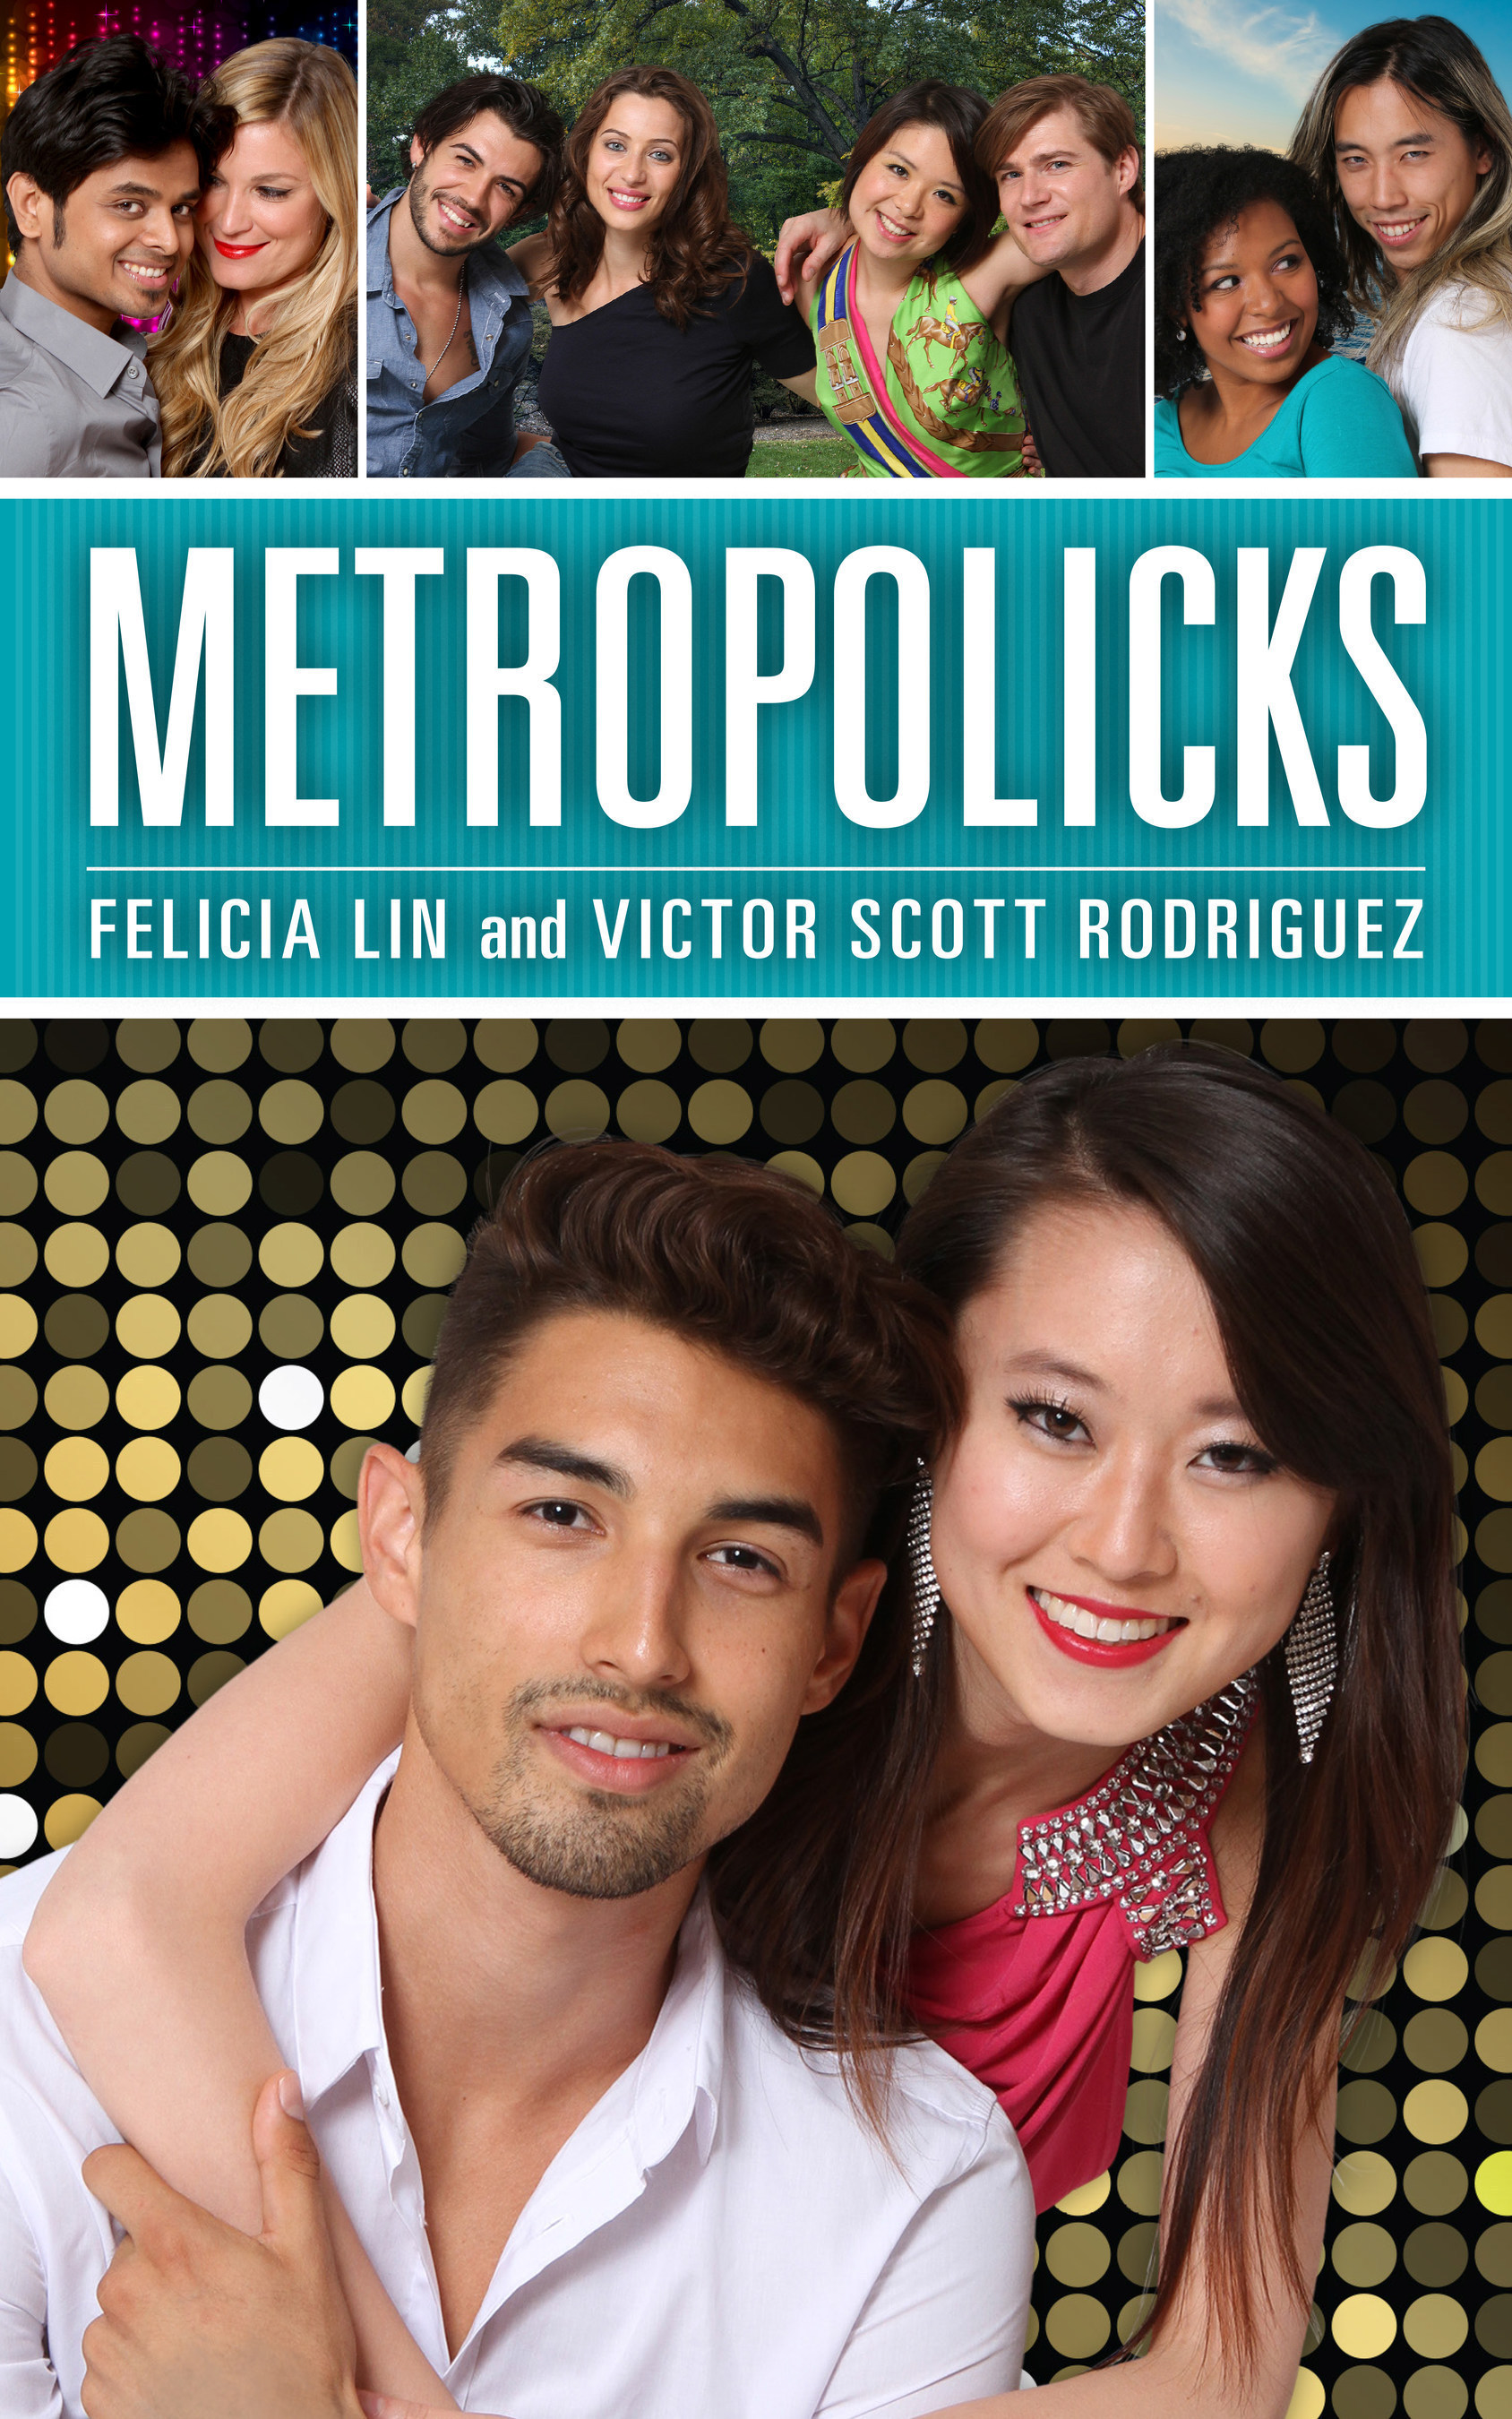 The novel METROPOLICKS centers around the dating adventures and misadventures of five main characters who are single, multi-ethnic, and live in Manhattan. With both male and female characters, the narration throughout the novel switches from a female character's perspective to a male character's. (PRNewsFoto/Lin and Rodriguez LLC)